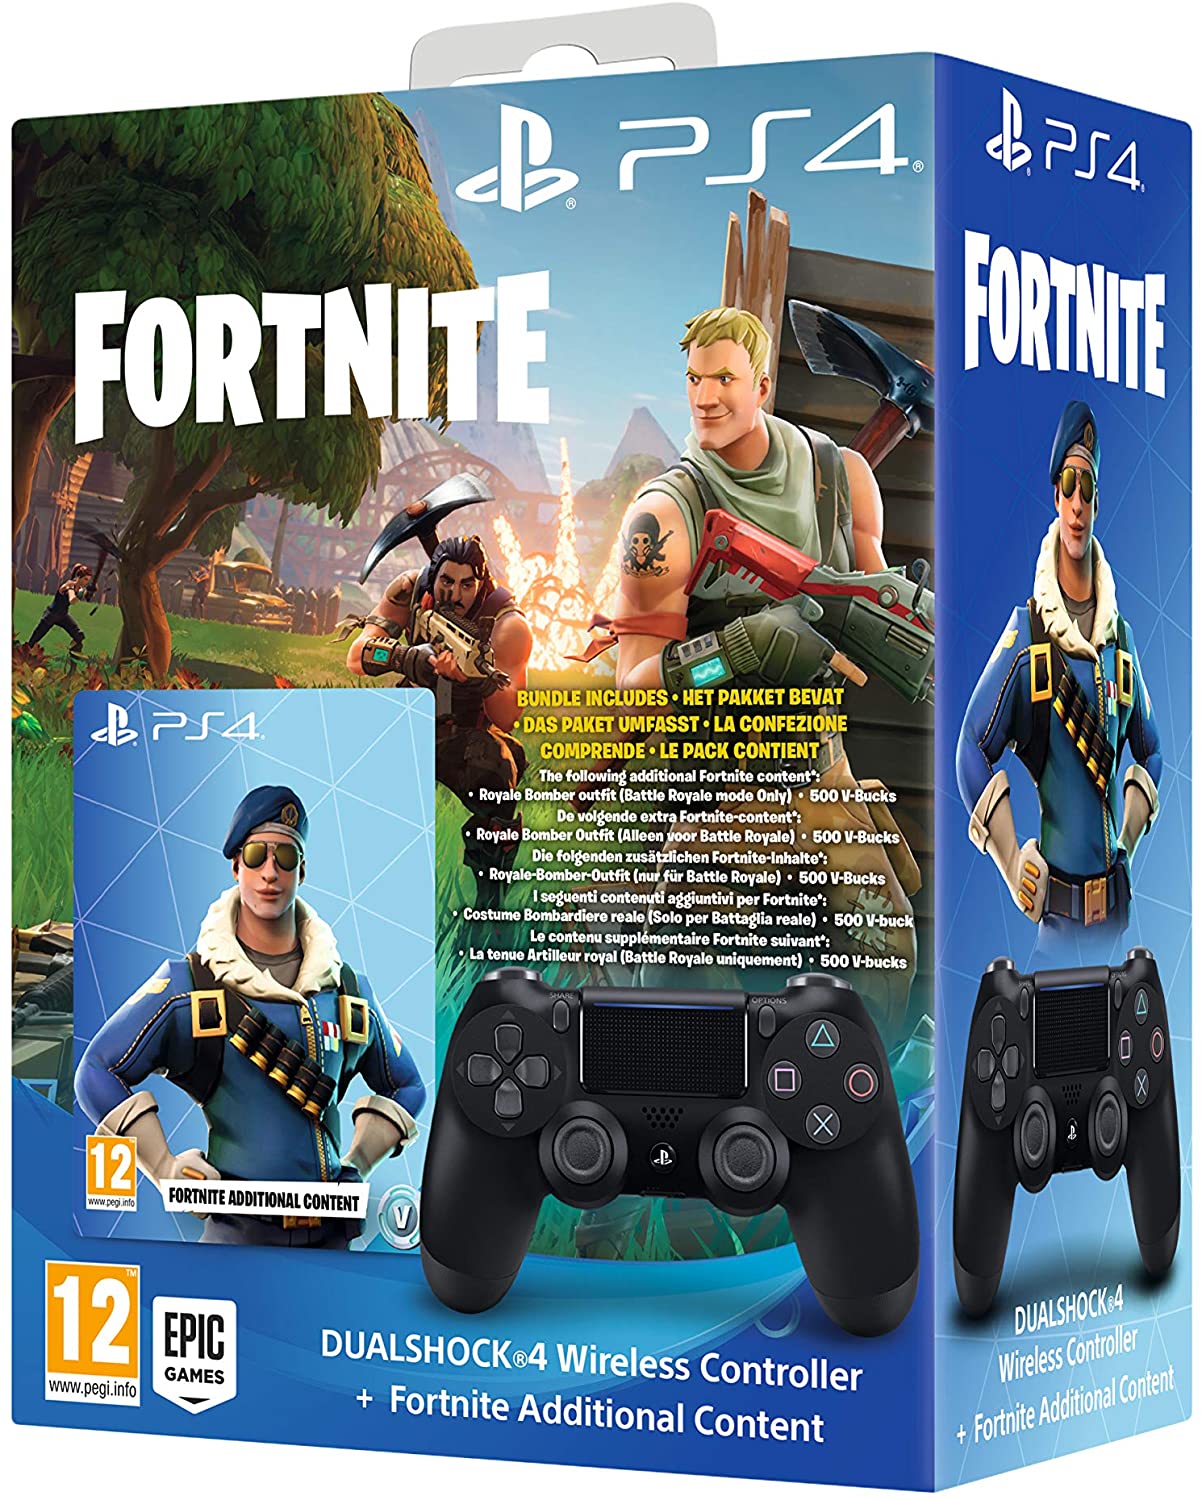 PS4 FortNite Dual Shock 4 Wireless Controller Fortnite additional content in UAE | Sharaf DG